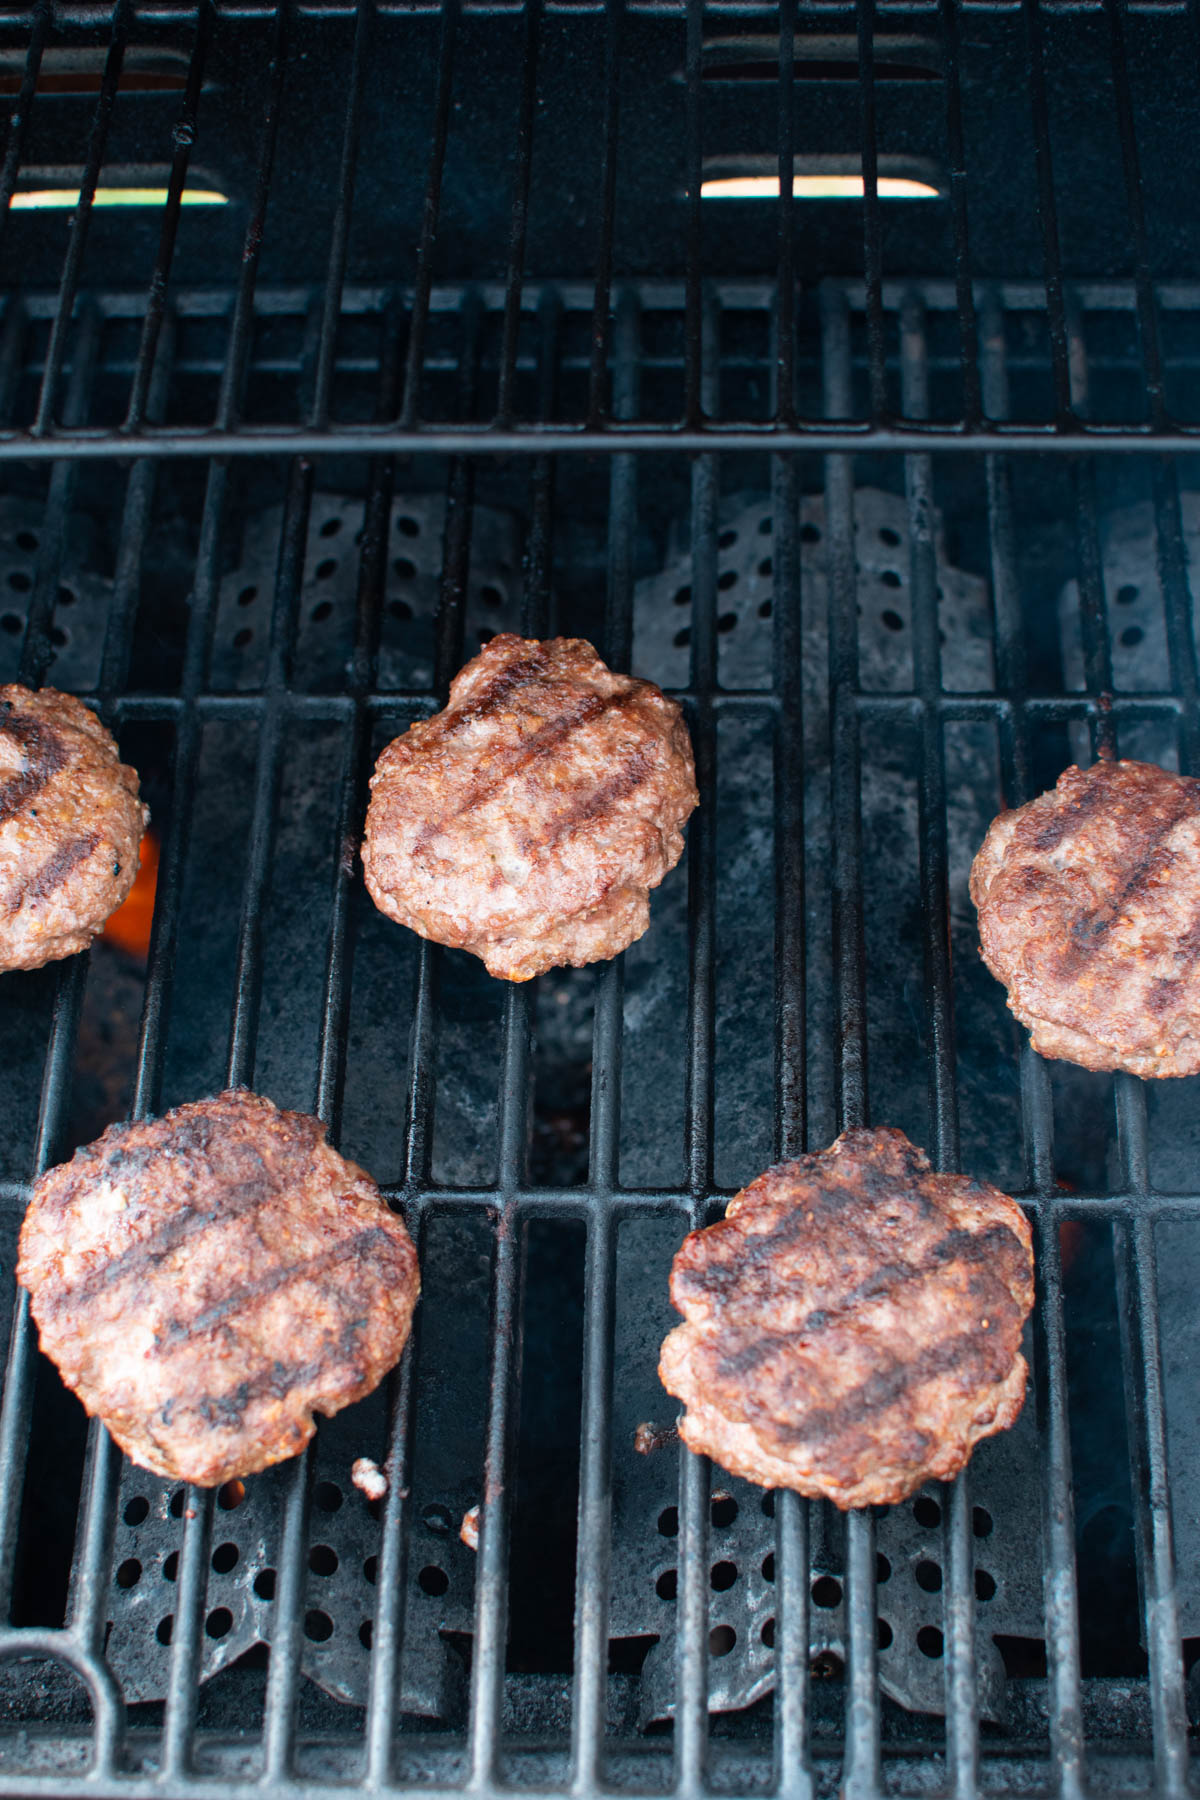 Five hamburgers on black grill with grill marks on them.